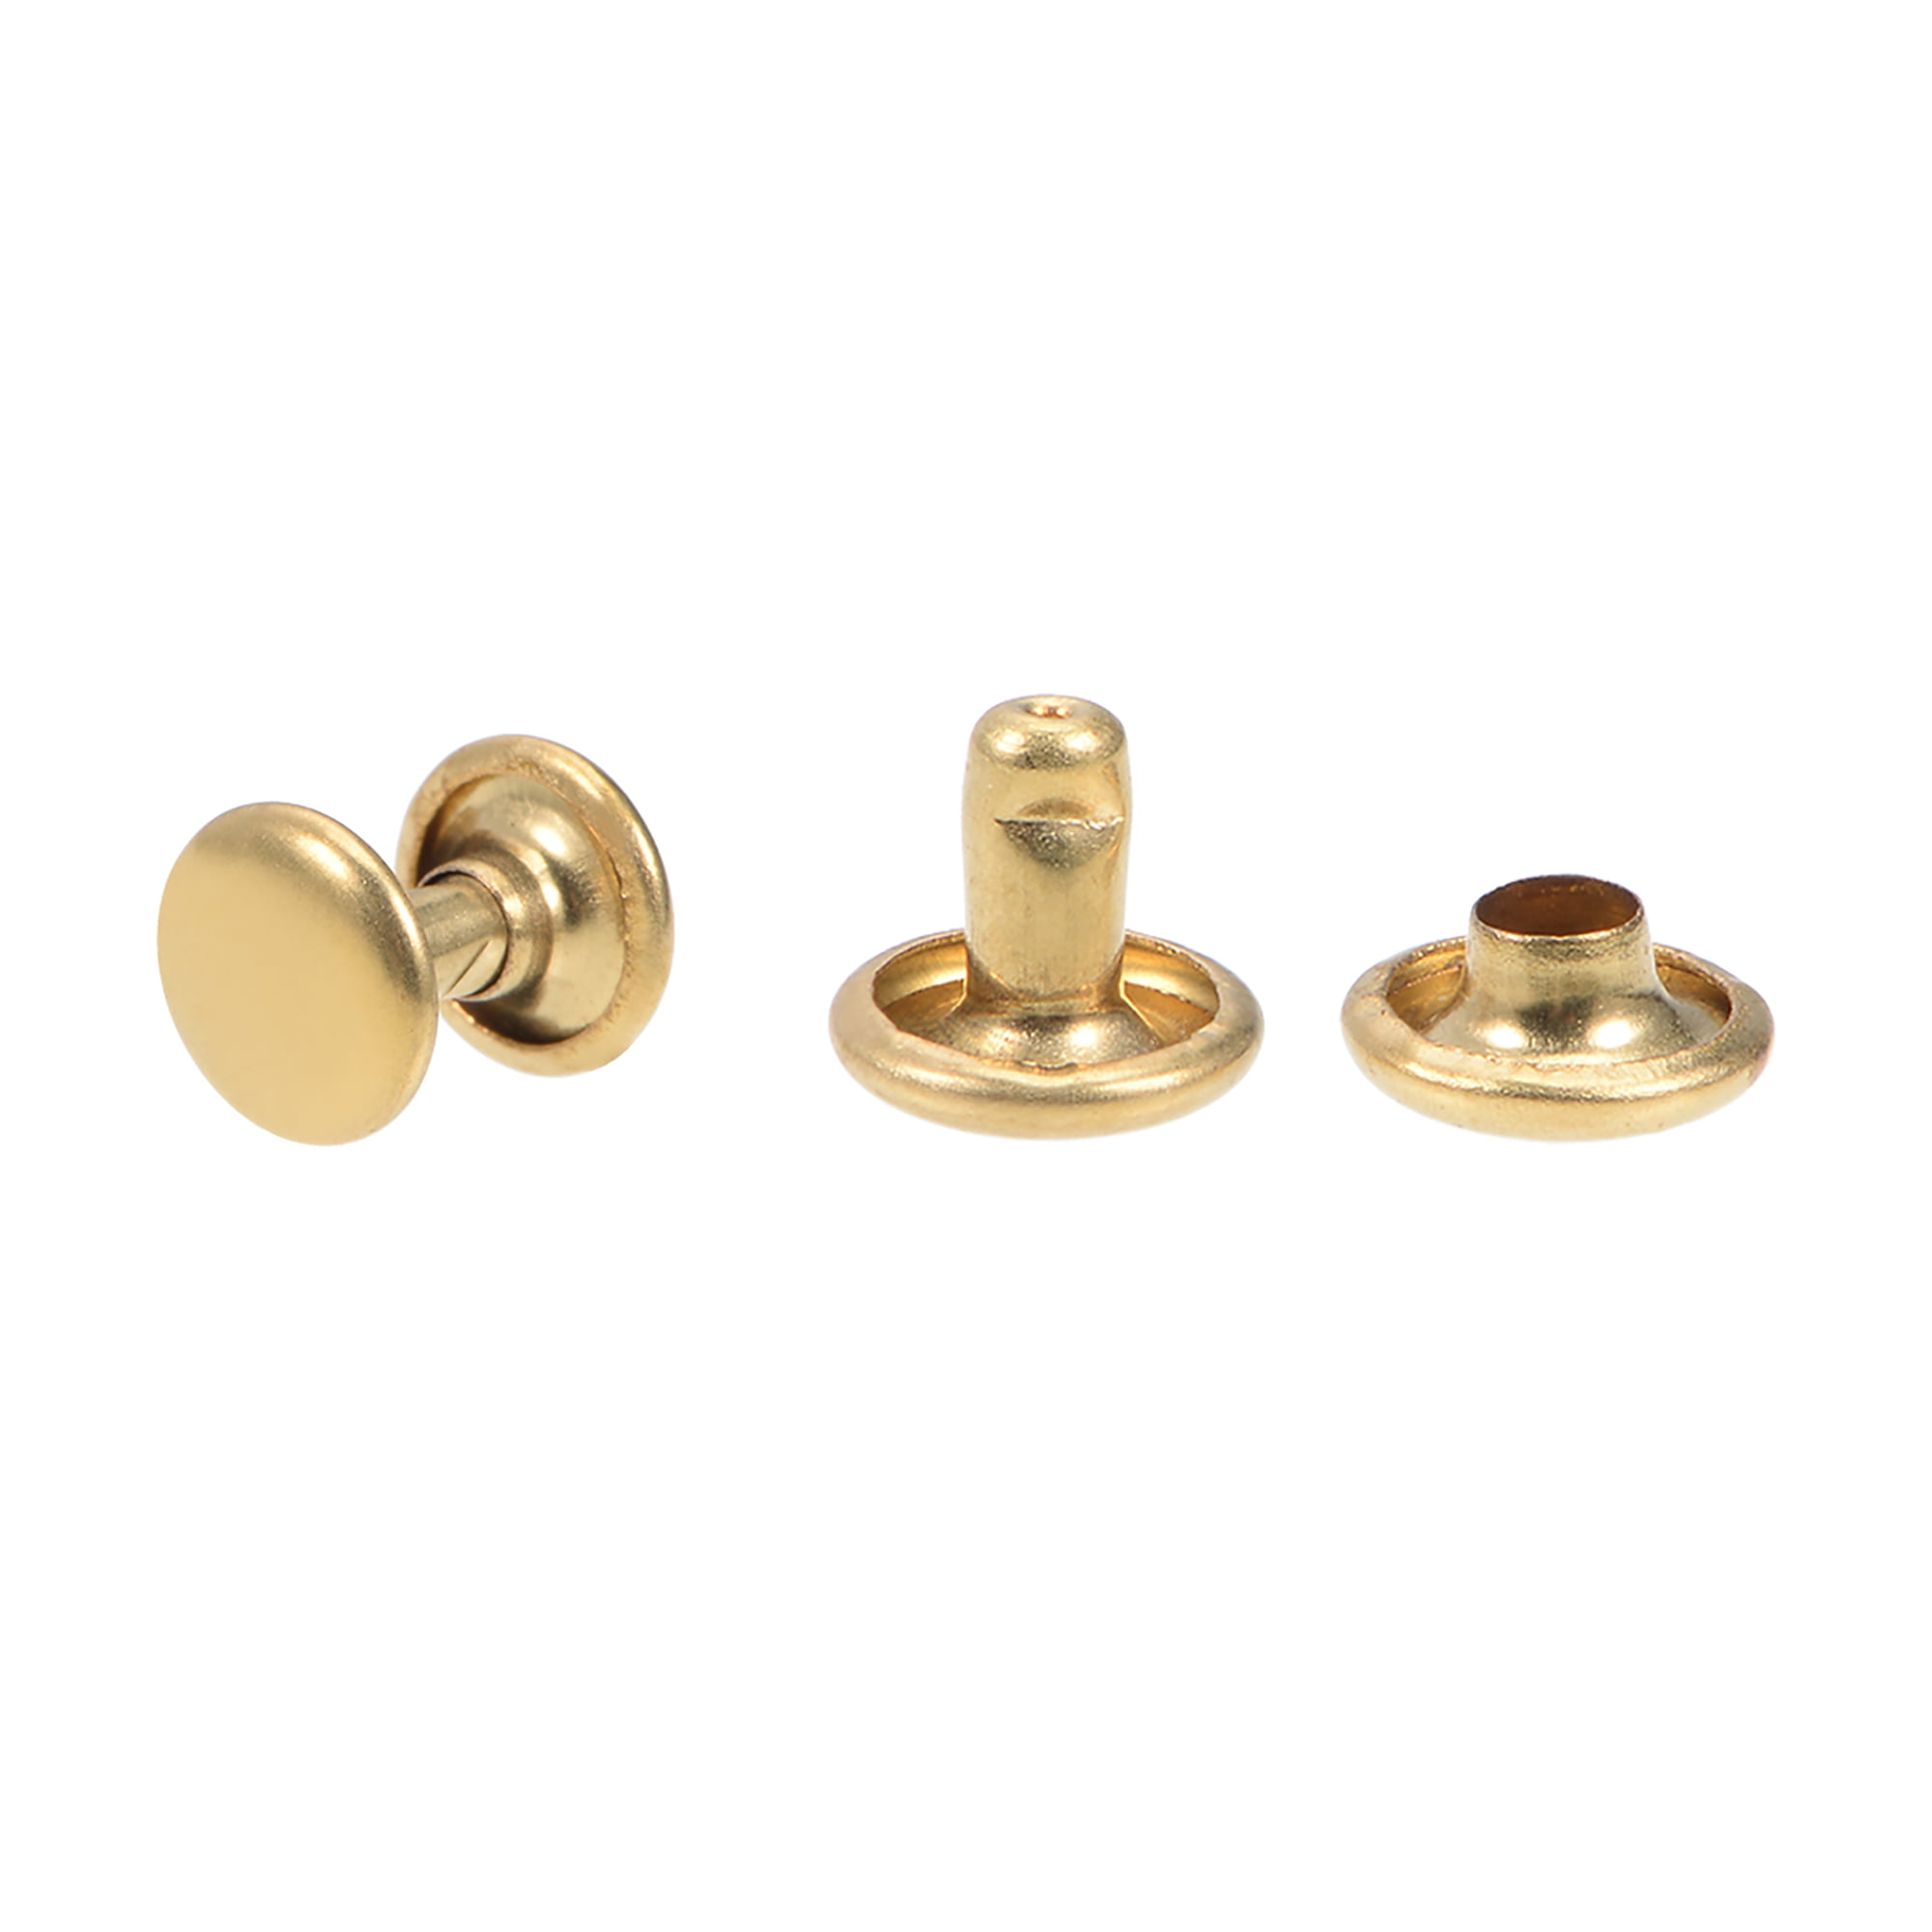 Uxcell 7mmx7mm Double Cap Rivets Brass, Rivets For Leather